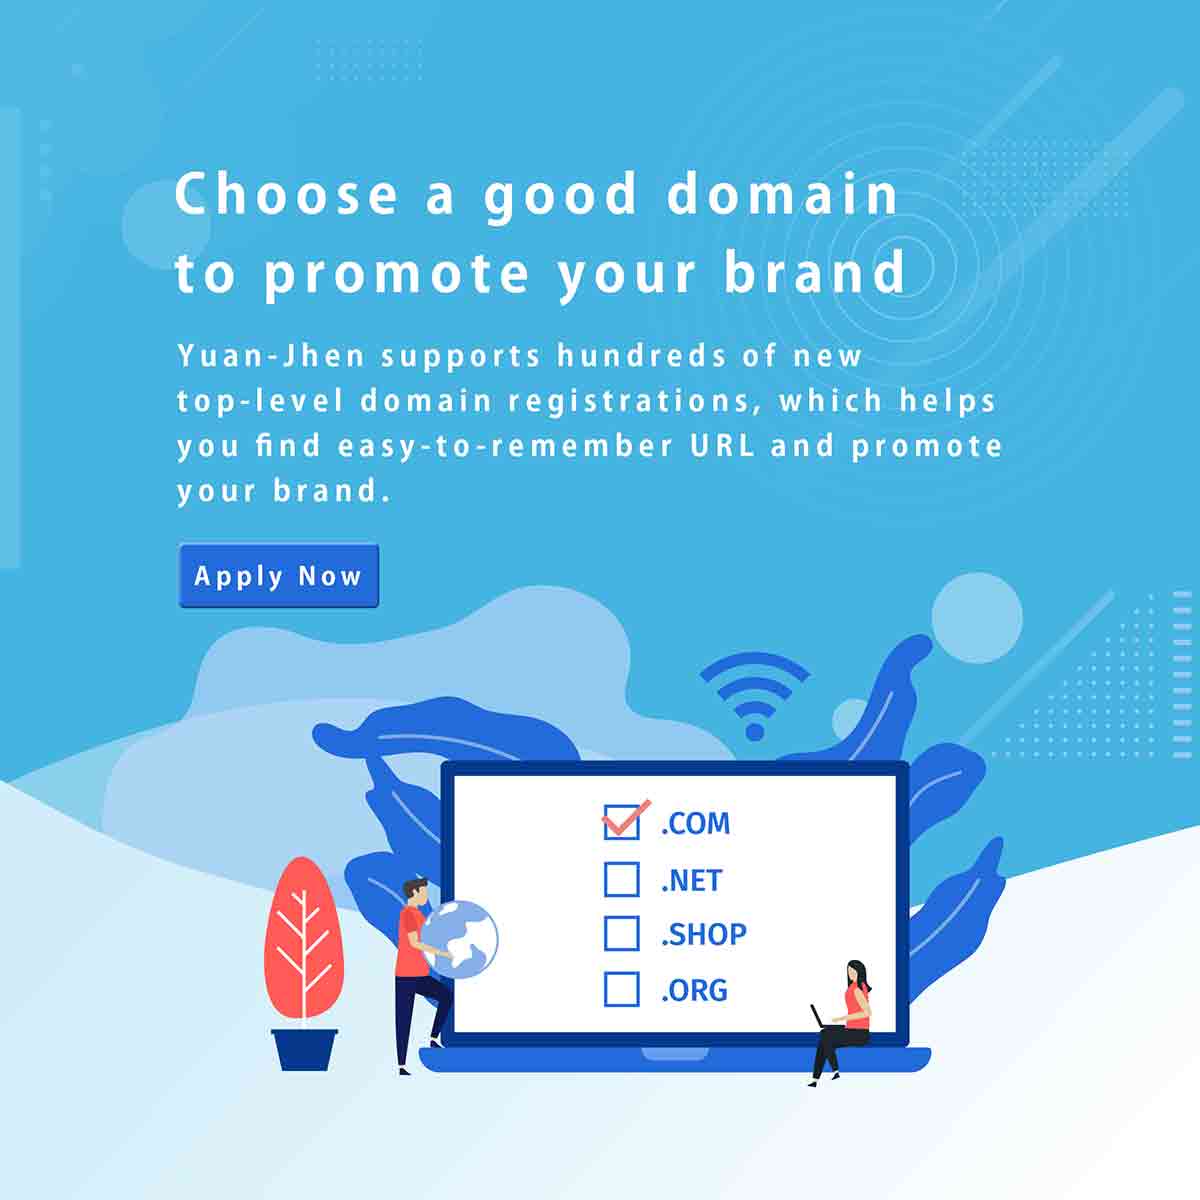 Choose a good domain to promote your brand